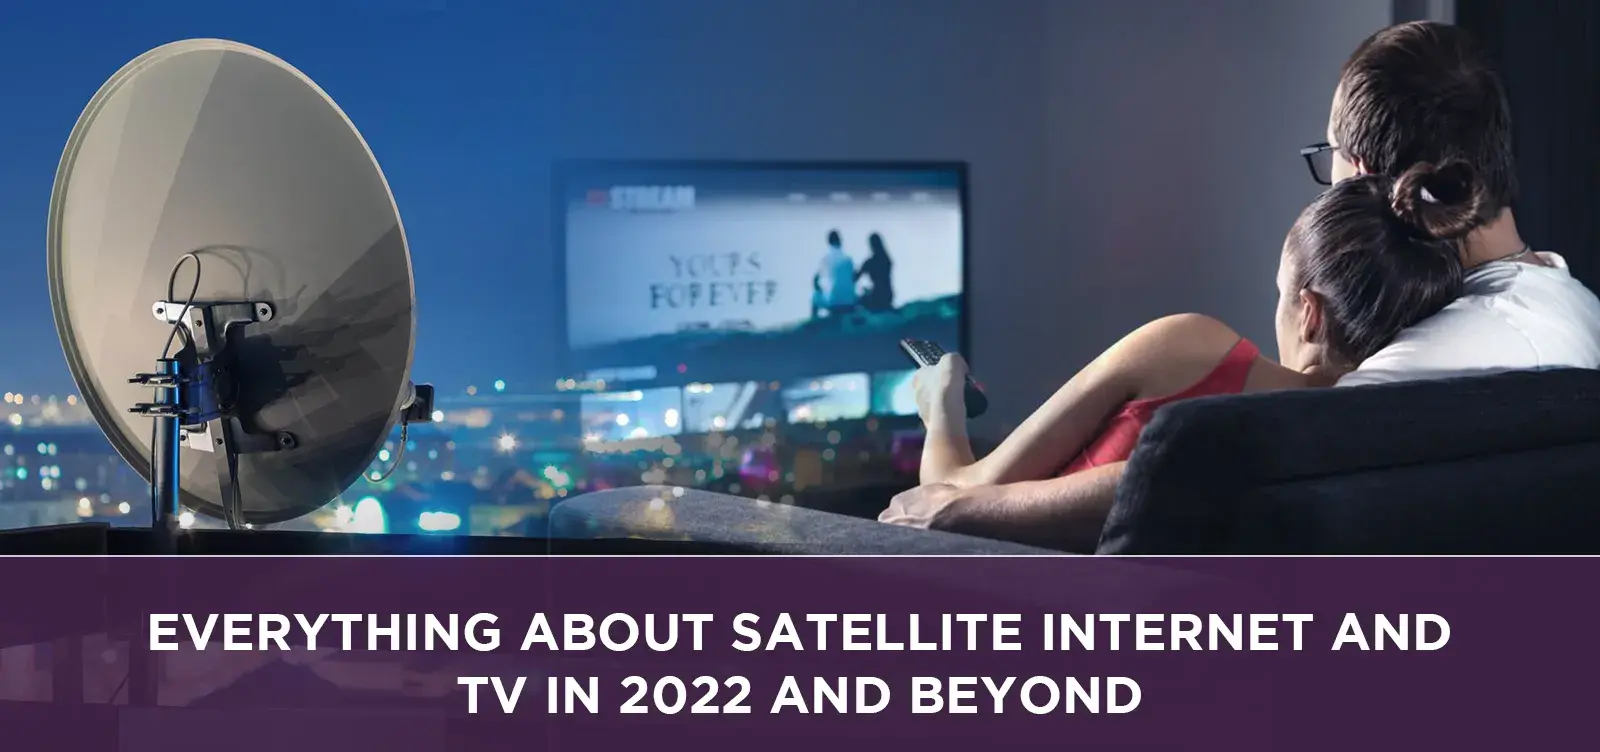 Everything about satellite internet and tv in 2022 and beyond